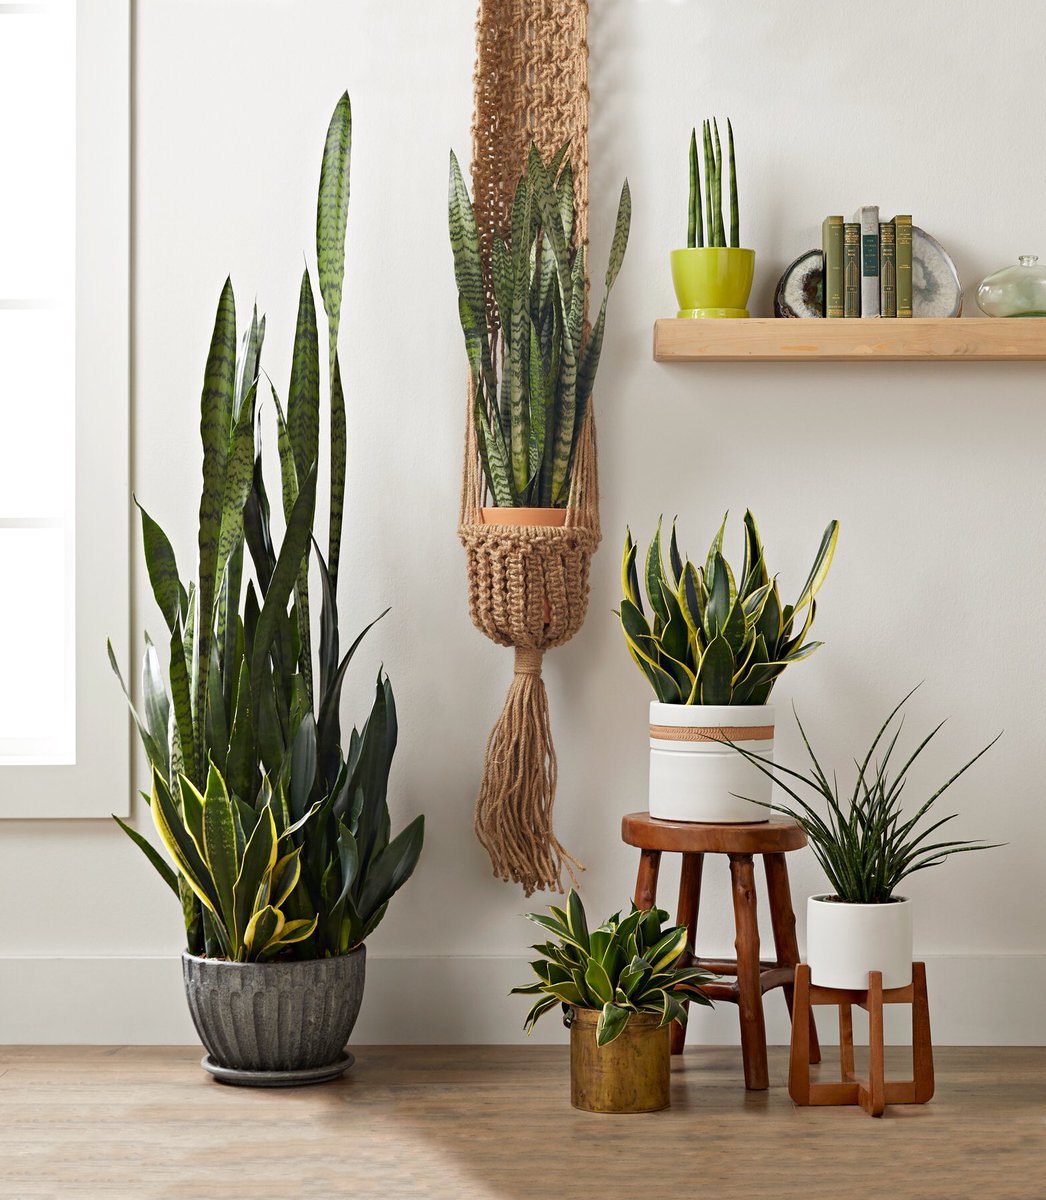 snake plant ~ emits oxygen at night that helps you sleep better~ removes xylene, trichloroethylene, toluene, benzene, and formaldehyde from the air~ has been used in Nigerian rituals to remove the evil eye